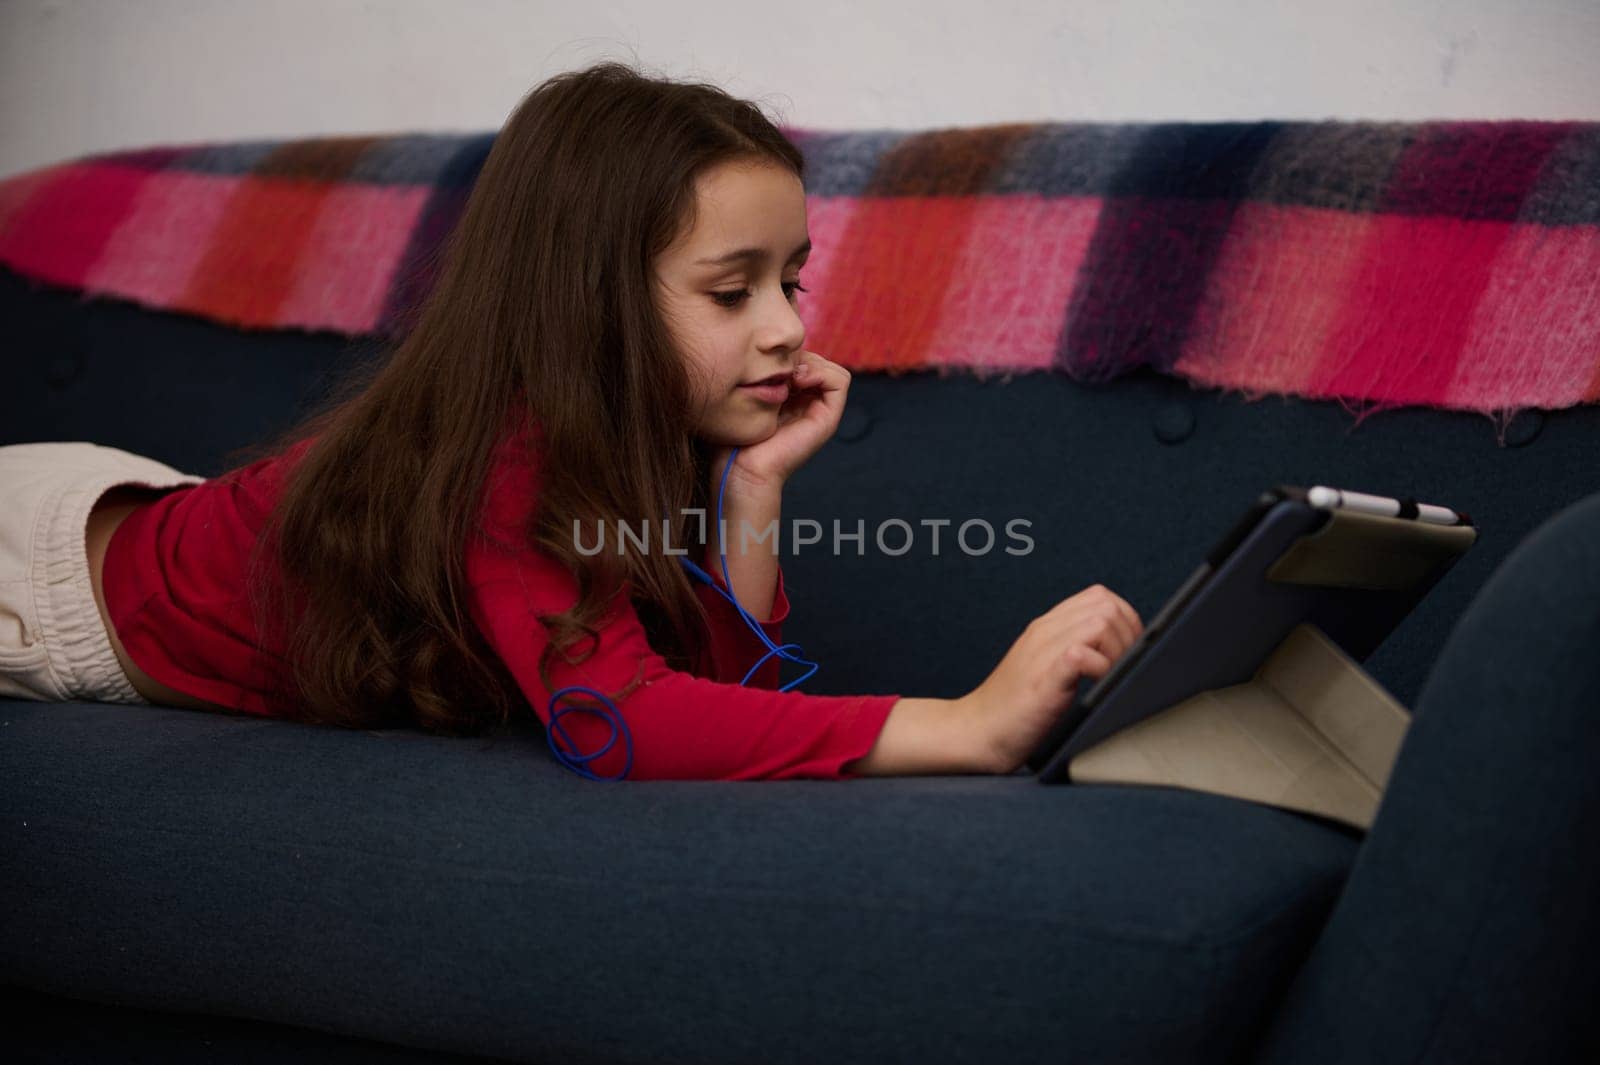 Adorable primary school age kid, cute little kid girl using digital tablet, watching movies while lying on the sofa at cozy home interior. Distance learning. Online education. Digital gadget addiction